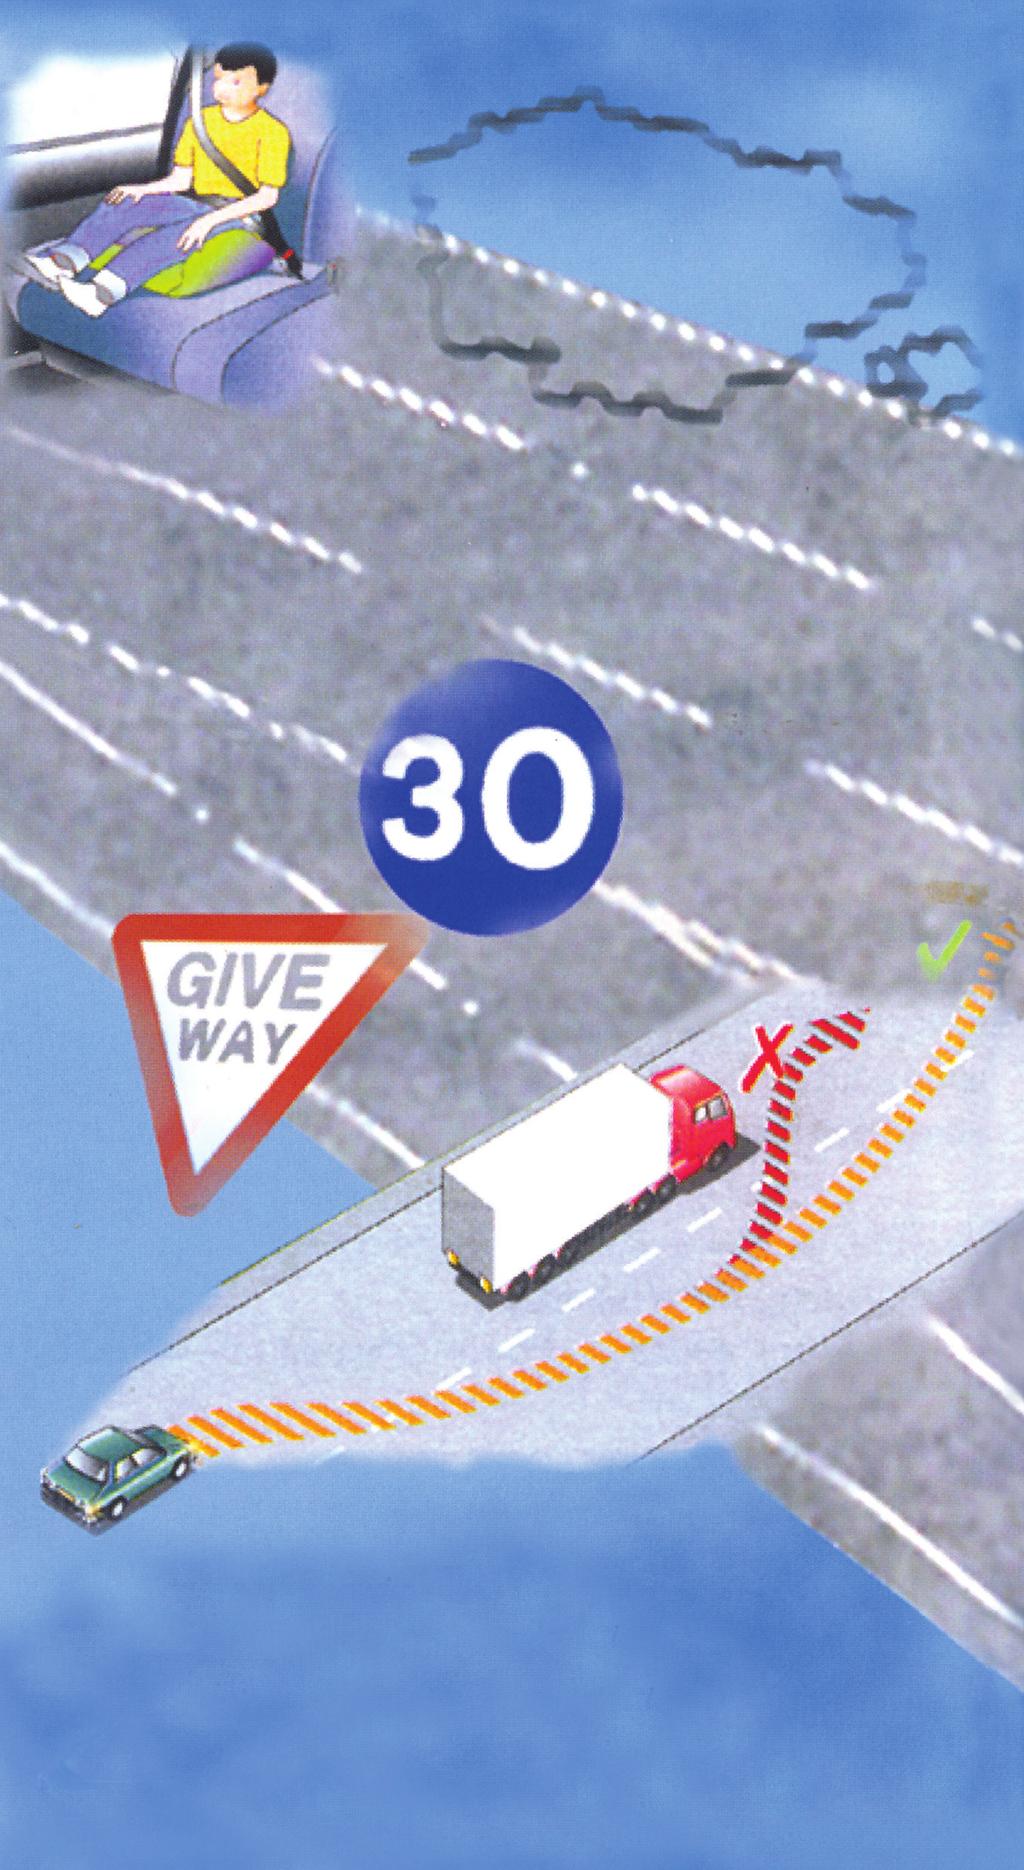 By reading and following the rules of The Highway Code you can help